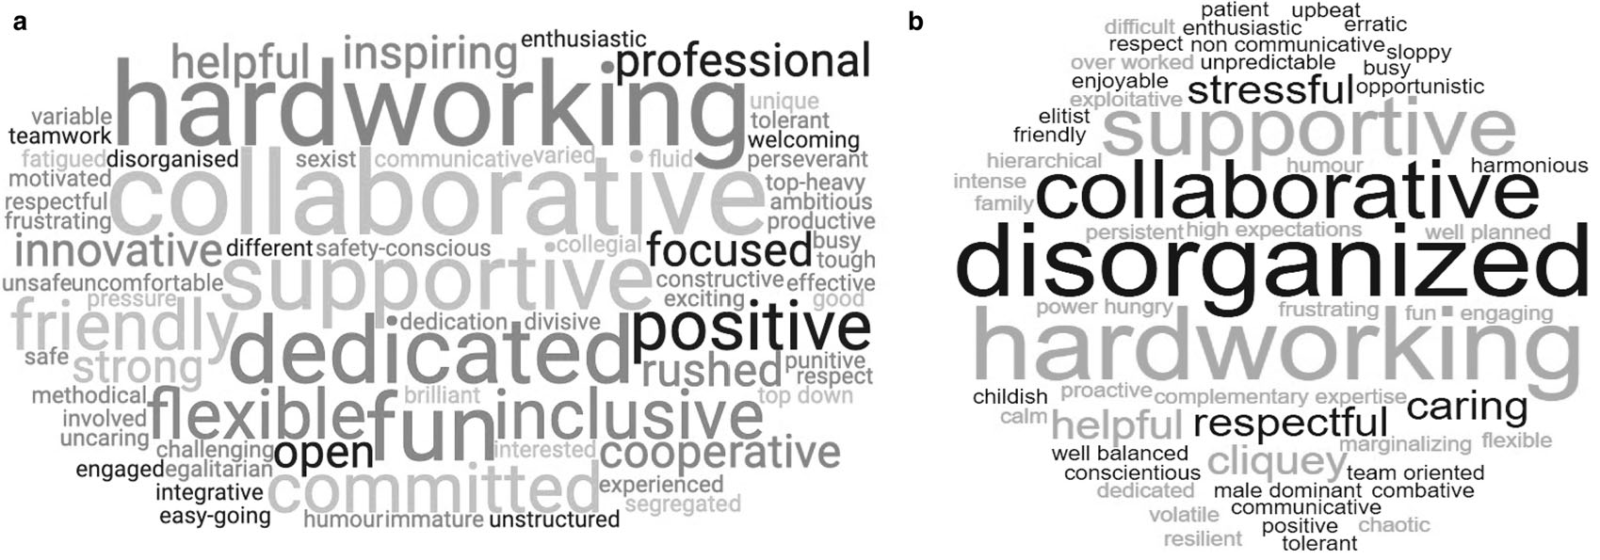 two word clouds, the first one with collaborative hardworking supportive as biggest entities and the second one with disorganised hardowkring and collaborative.